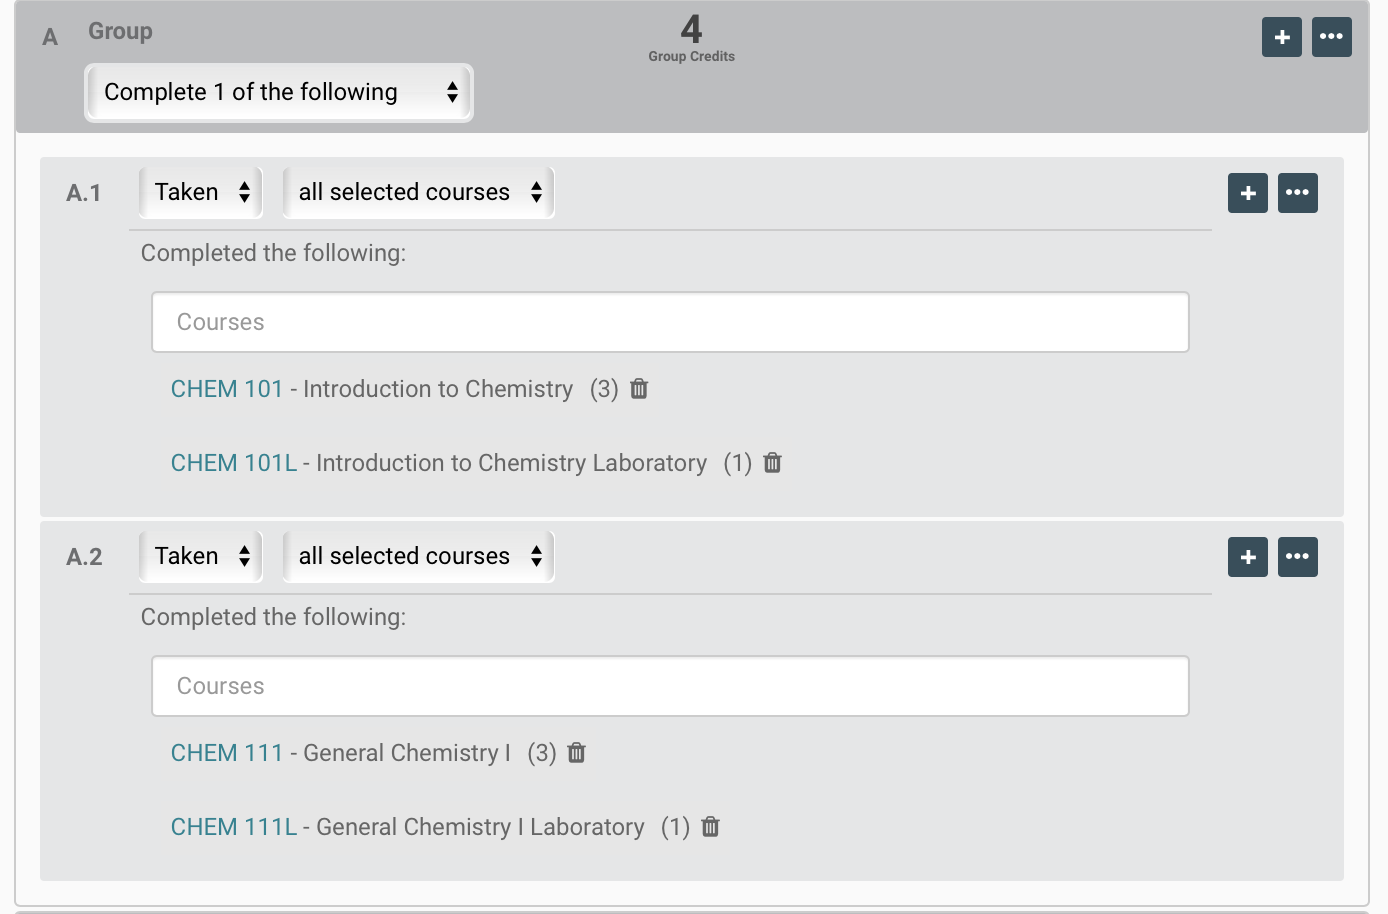 Shows group A complete one of the following then sub groups A.1 and A.2. A.1= taken all selected courses (entered) Chem 101 and Chem 101L. A.2= taken all selected courses (entered) Chem 111 and Chem 111L